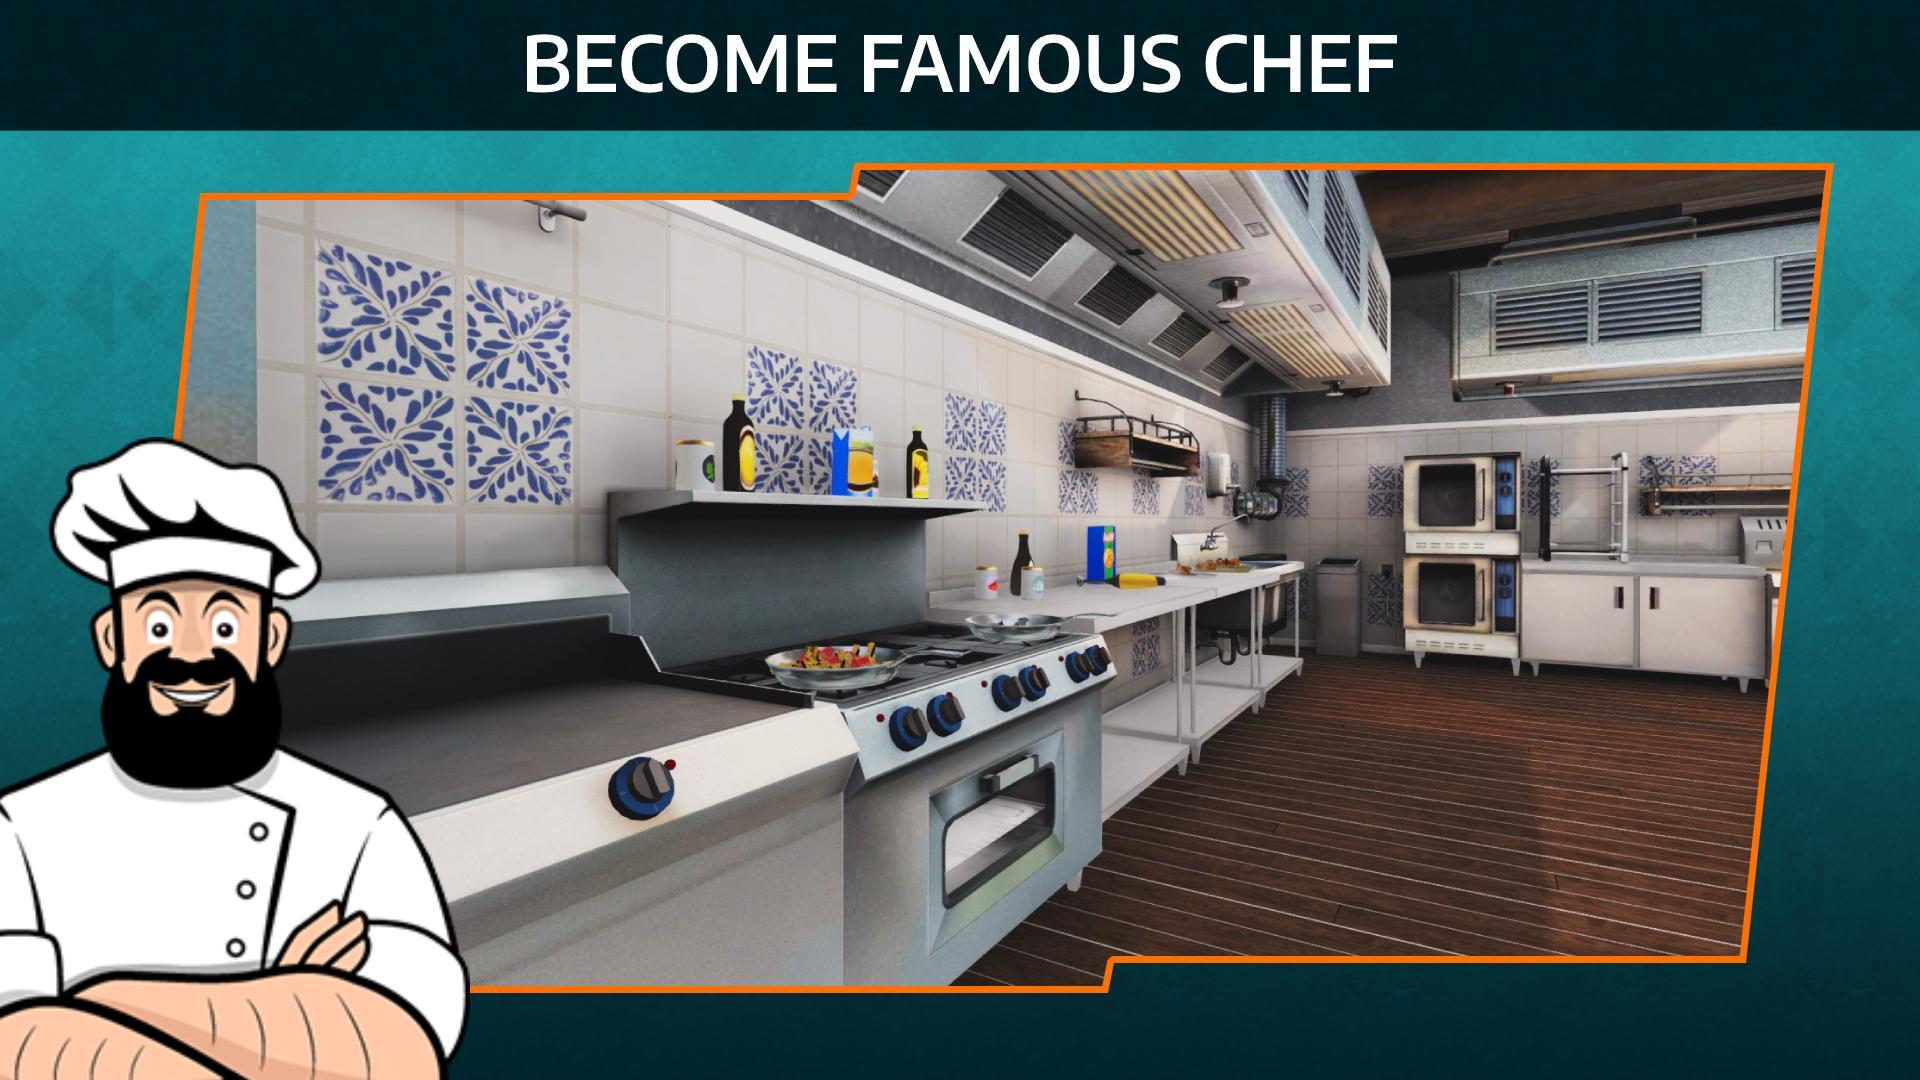 Cooking Simulator 2: Better Together android iOS-TapTap